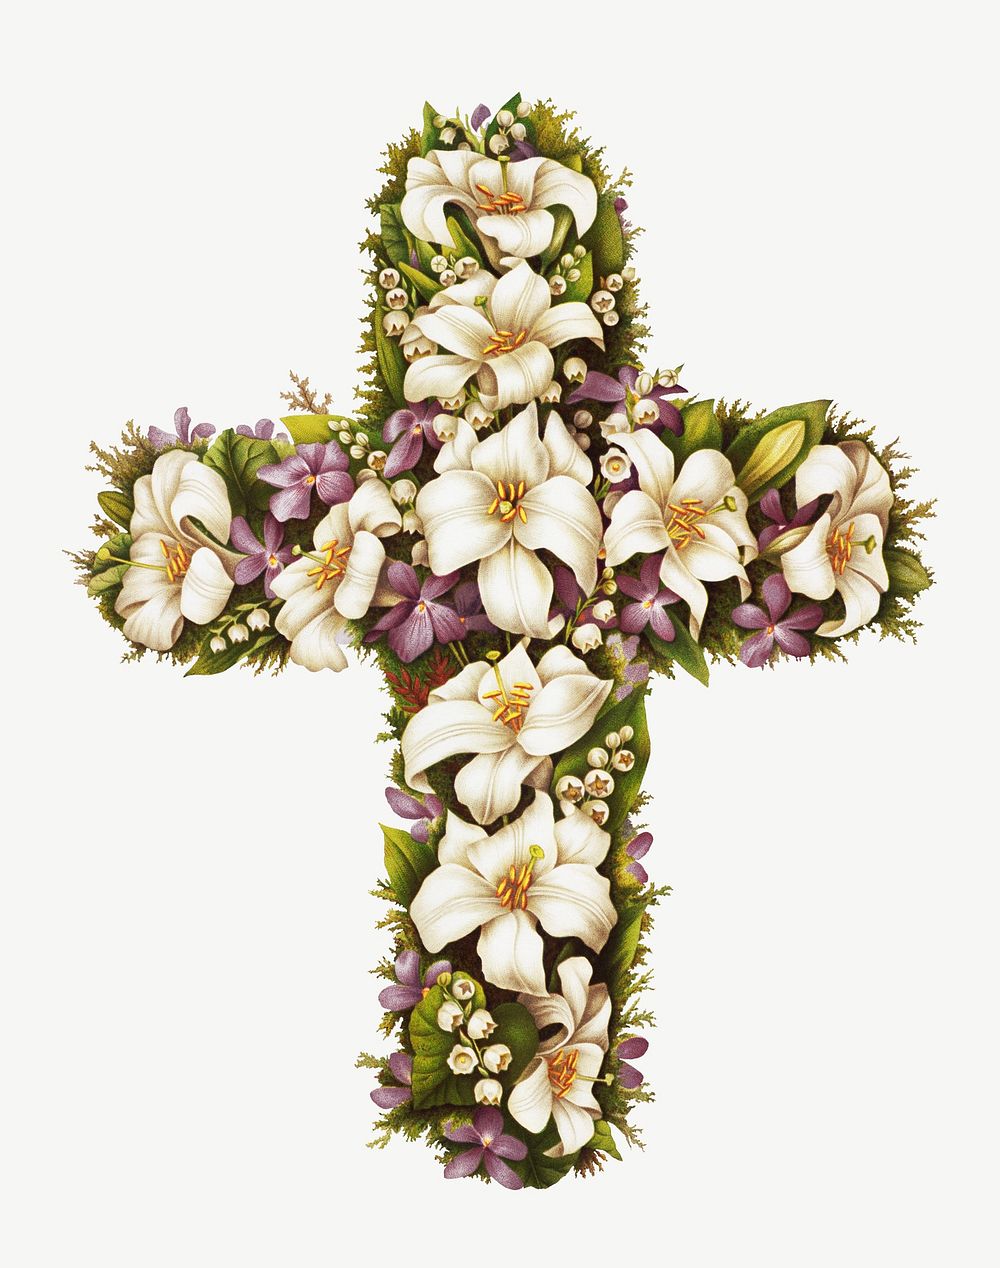 Floral cross vintage chromolithograph art psd. Remixed by rawpixel. 